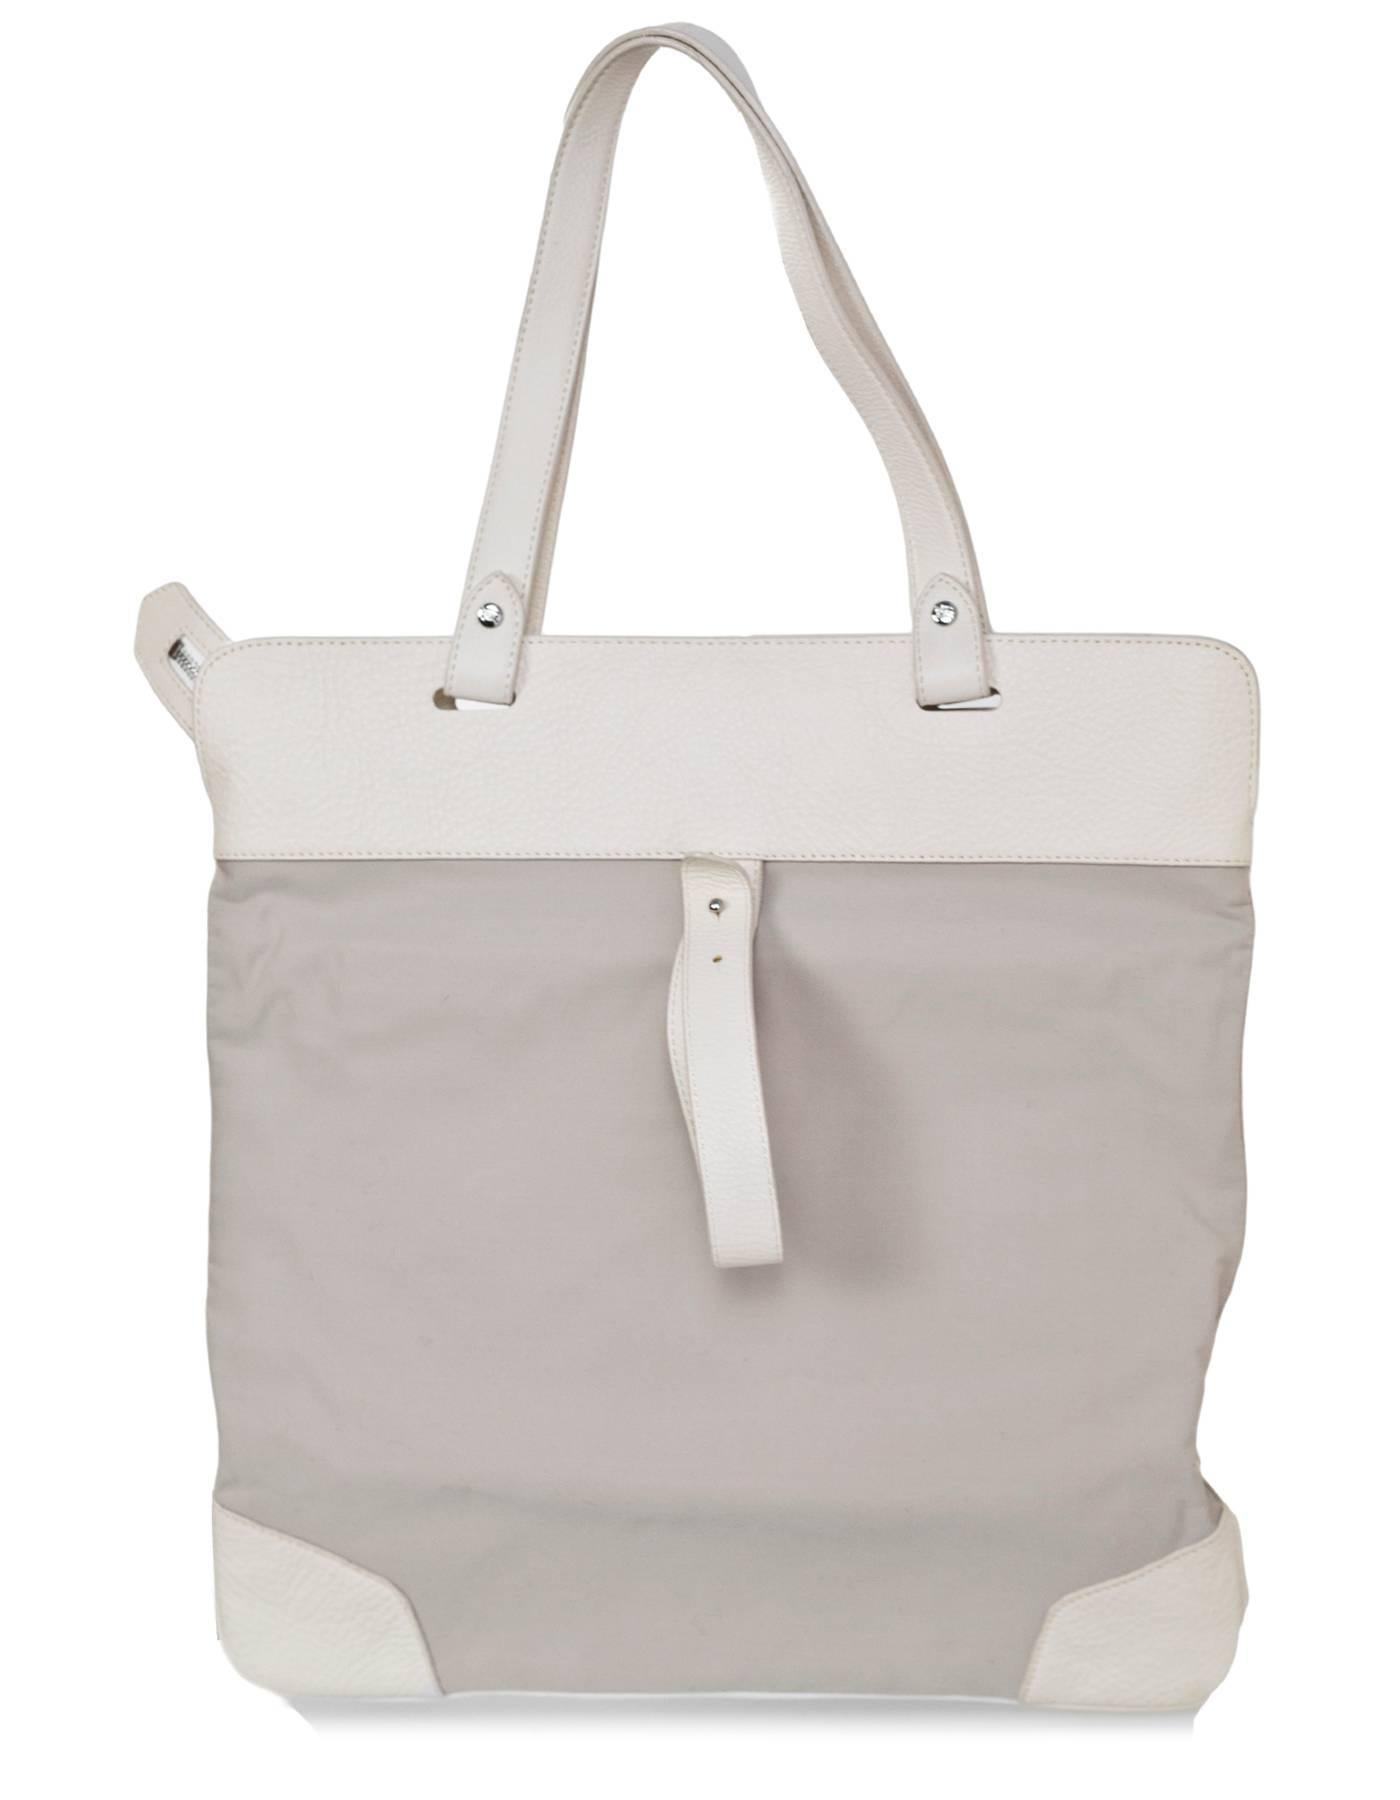 Gray Burberry White & Light Grey Leather & Canvas Tote Bag